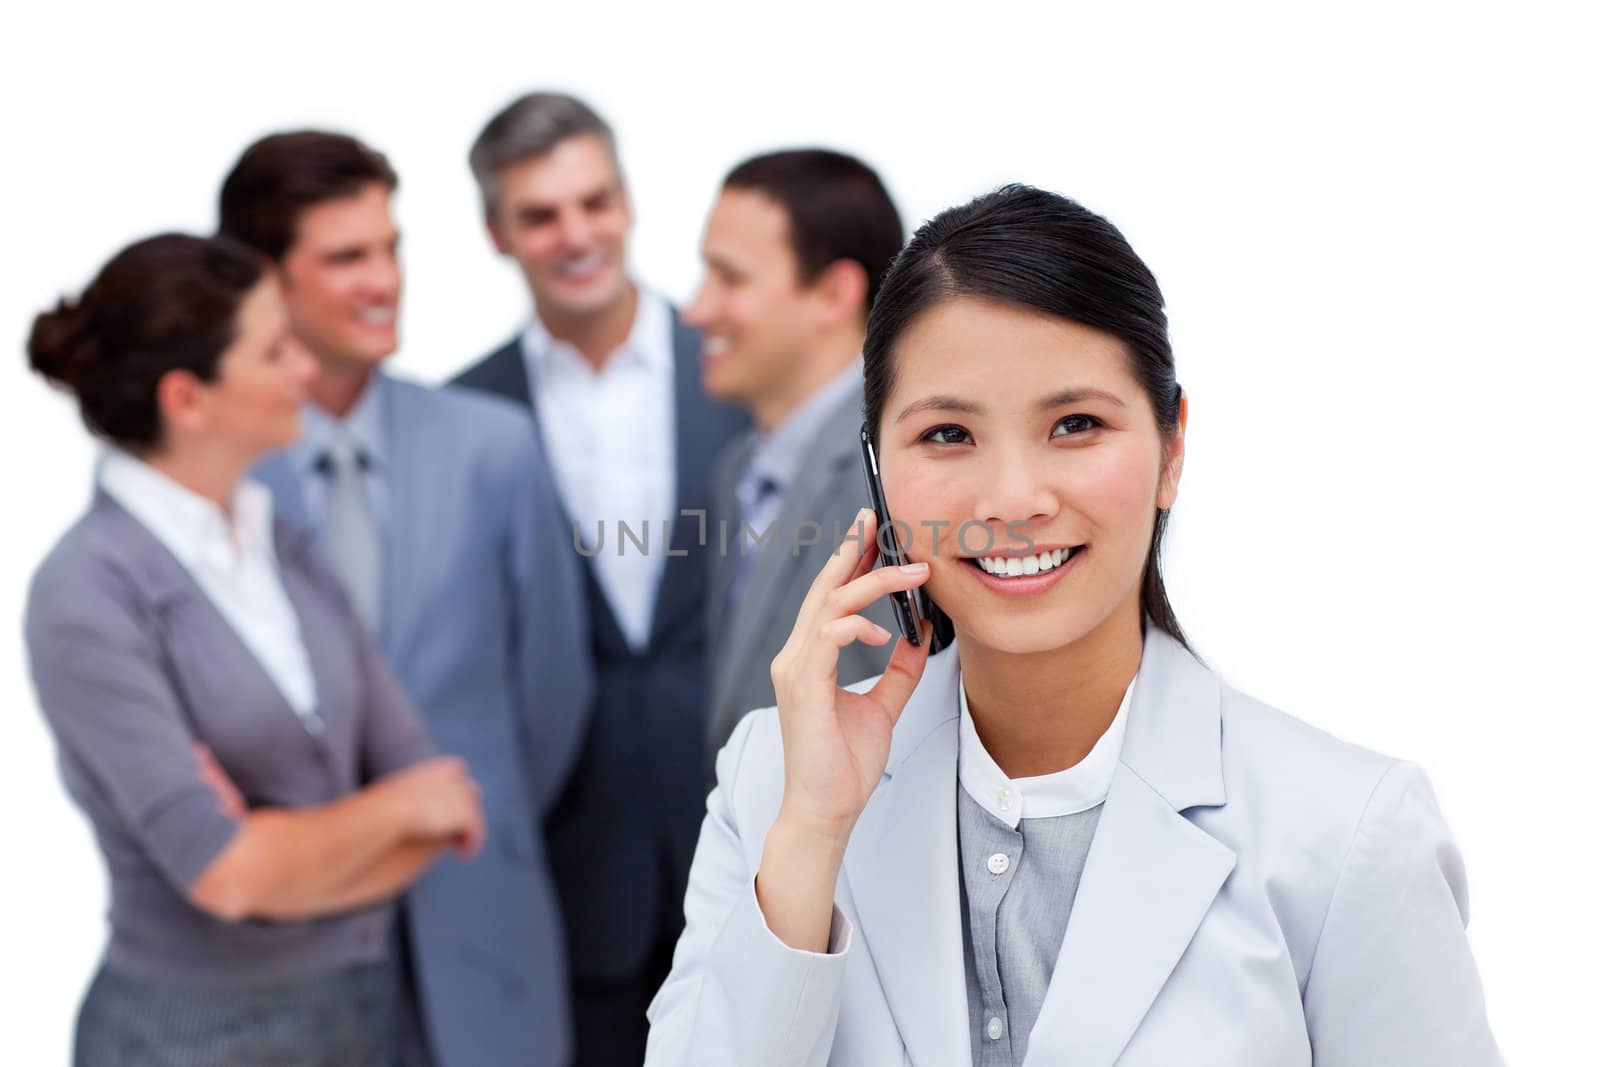 Jolly businesswoman talking on phone in front of her team against a white background